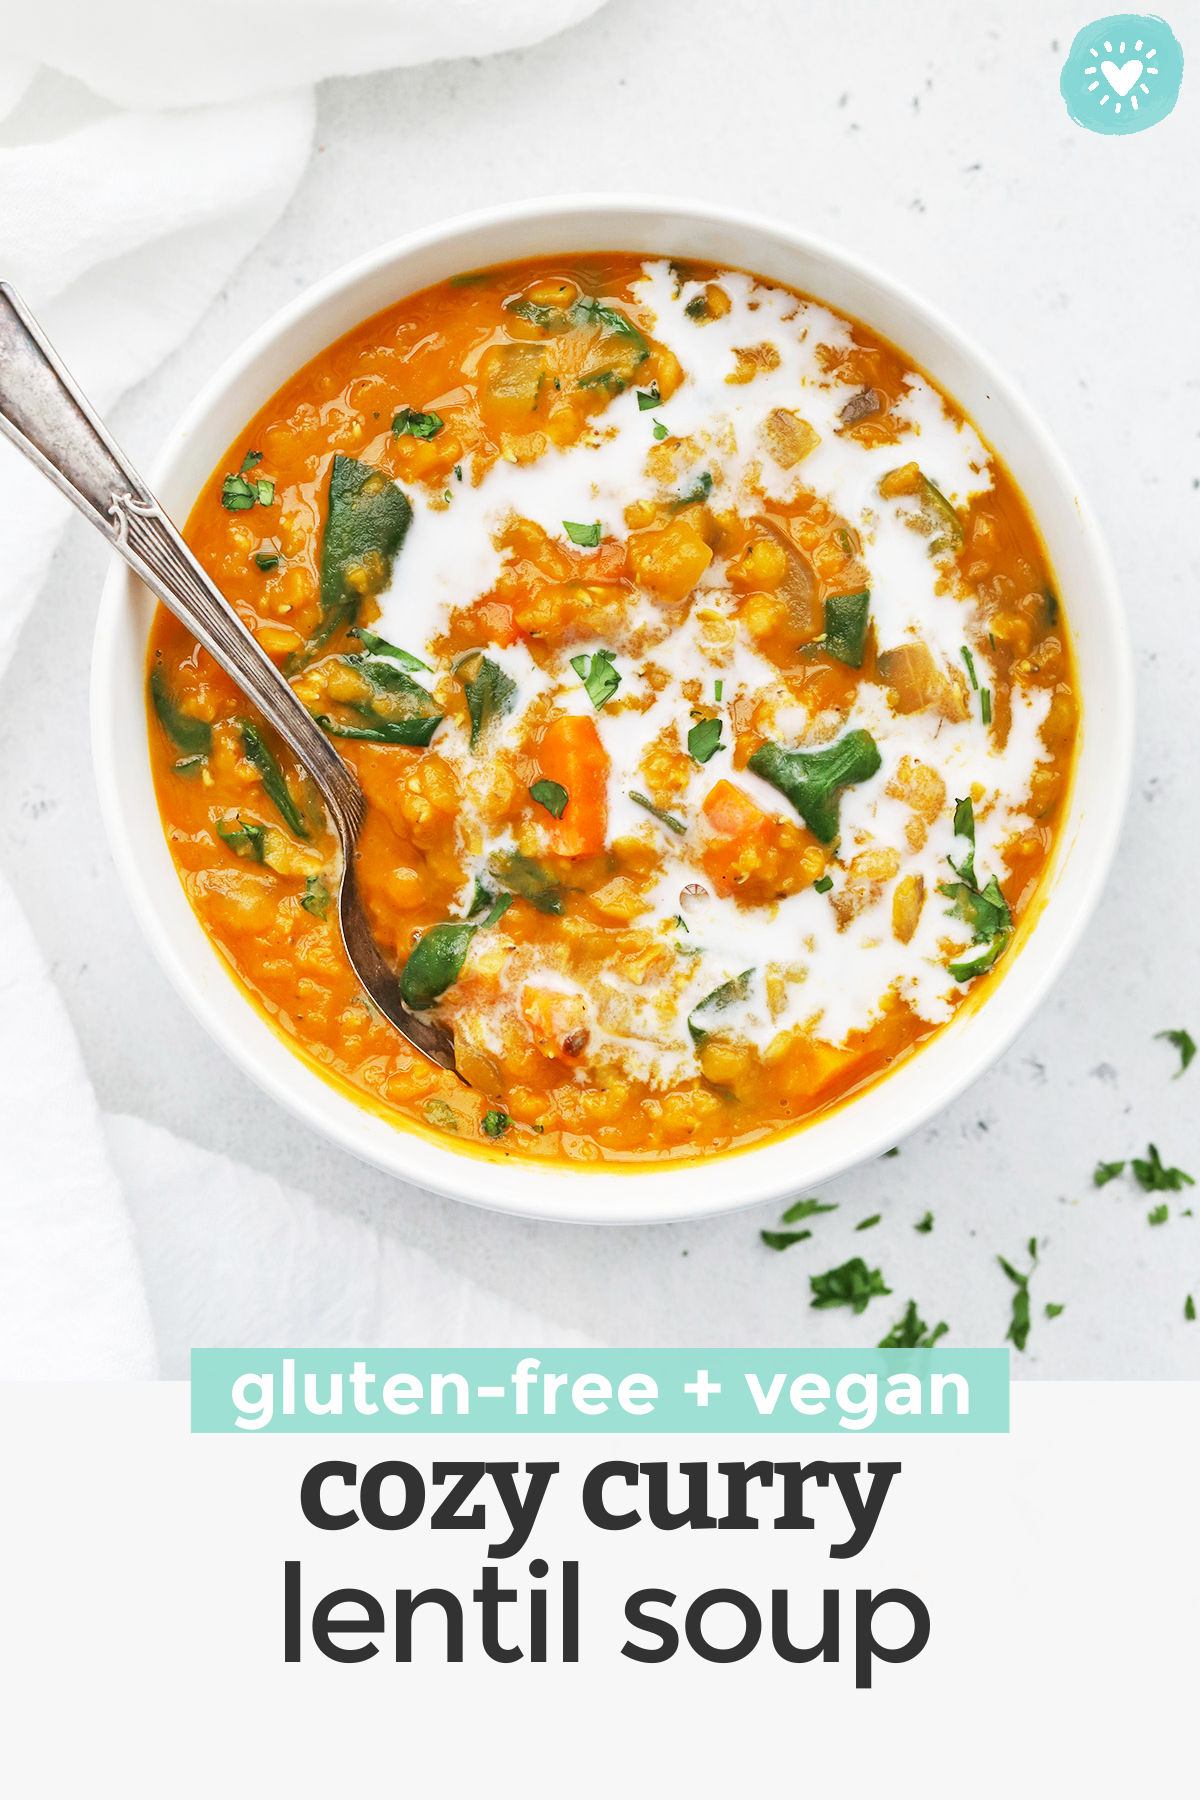 Cozy Curry Lentil Soup - This easy lentil soup recipe is perfect for cold weather and cozy days in. (Vegan, Gluten-Free) // Vegan Lentil Soup // Healthy Lentil Soup // Healthy Soup Recipe // Healthy Lunch // Meal Prep Lunch #lentilsoup #healthysoup #healthylunch #vegan #glutenfree